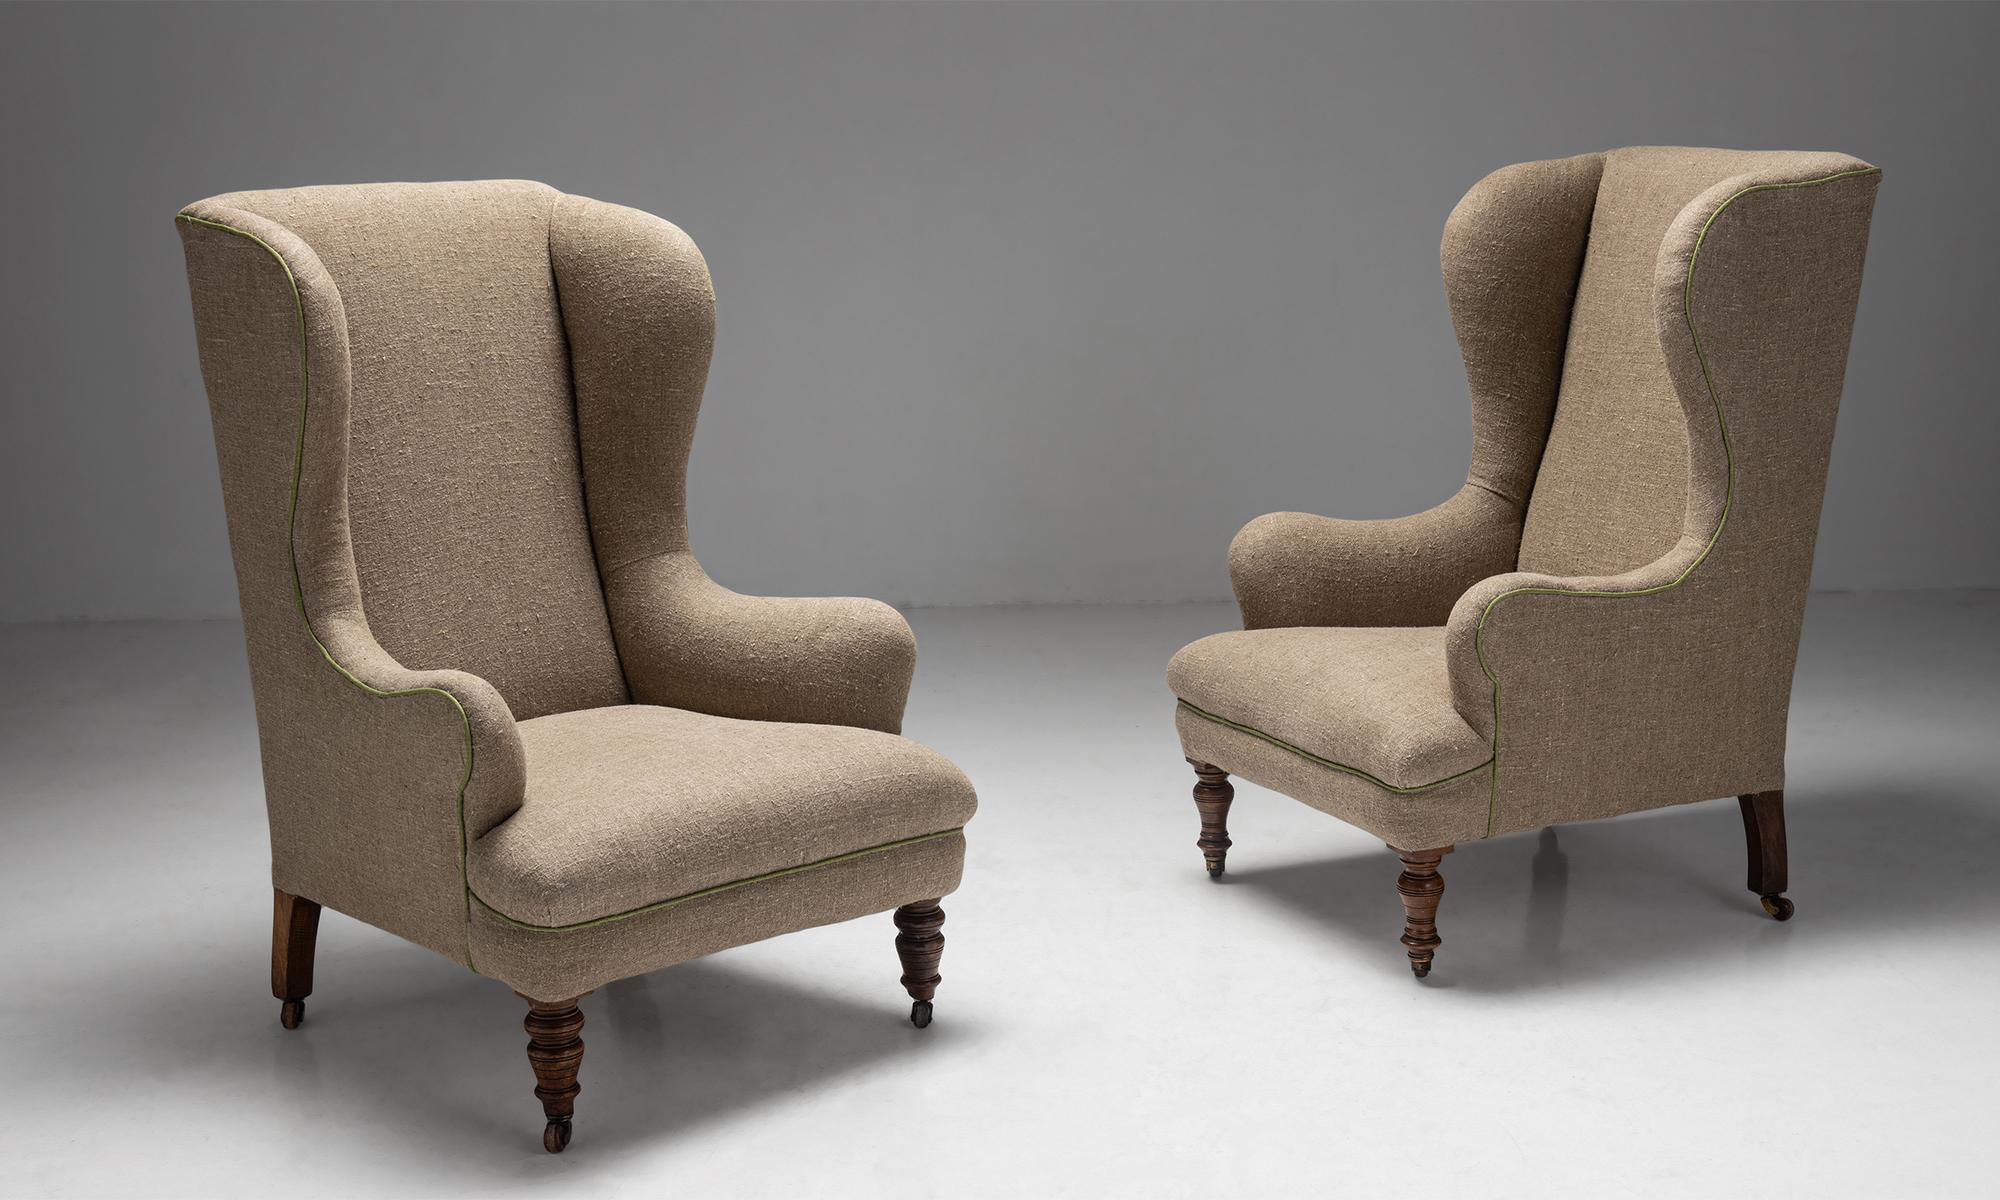 Wingback armchairs, Spain Circa 1890.

Newly upholstered in stone washed linen with contrast piping, on turned mahogany legs with original castors.